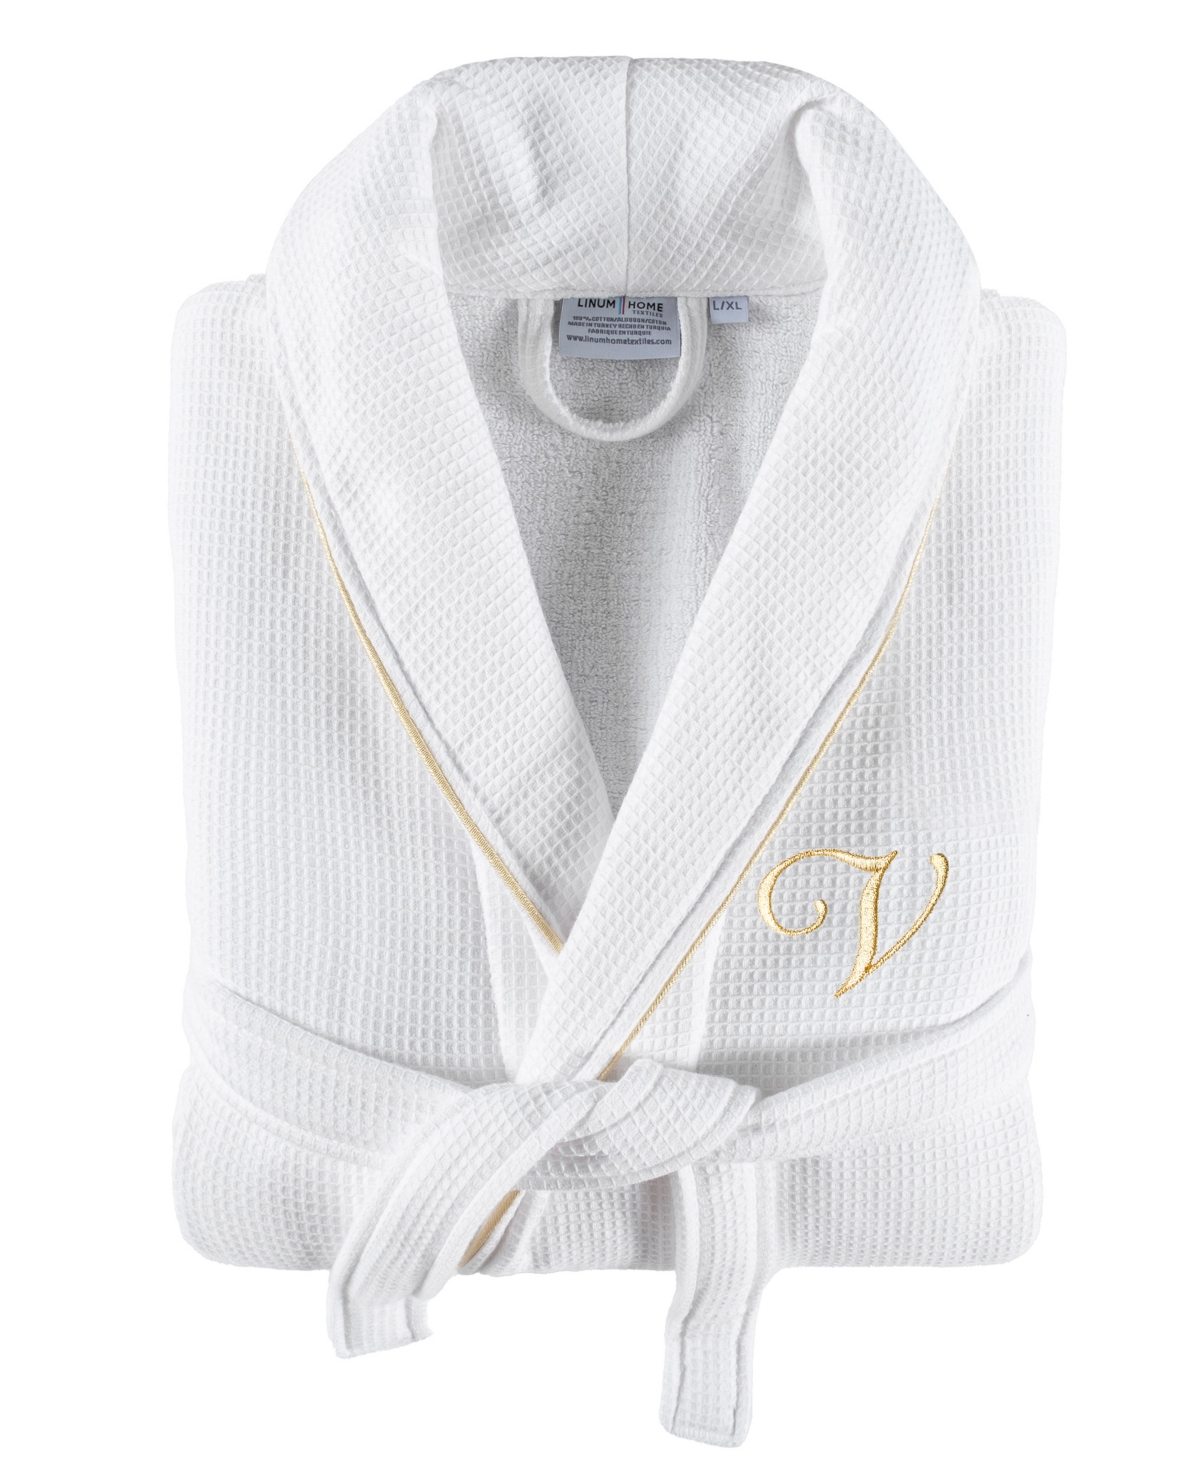 Linum Home Textiles 100% Turkish Cotton Unisex Personalized Waffle Weave Terry Bathrobe With Satin Piped Trim In White V